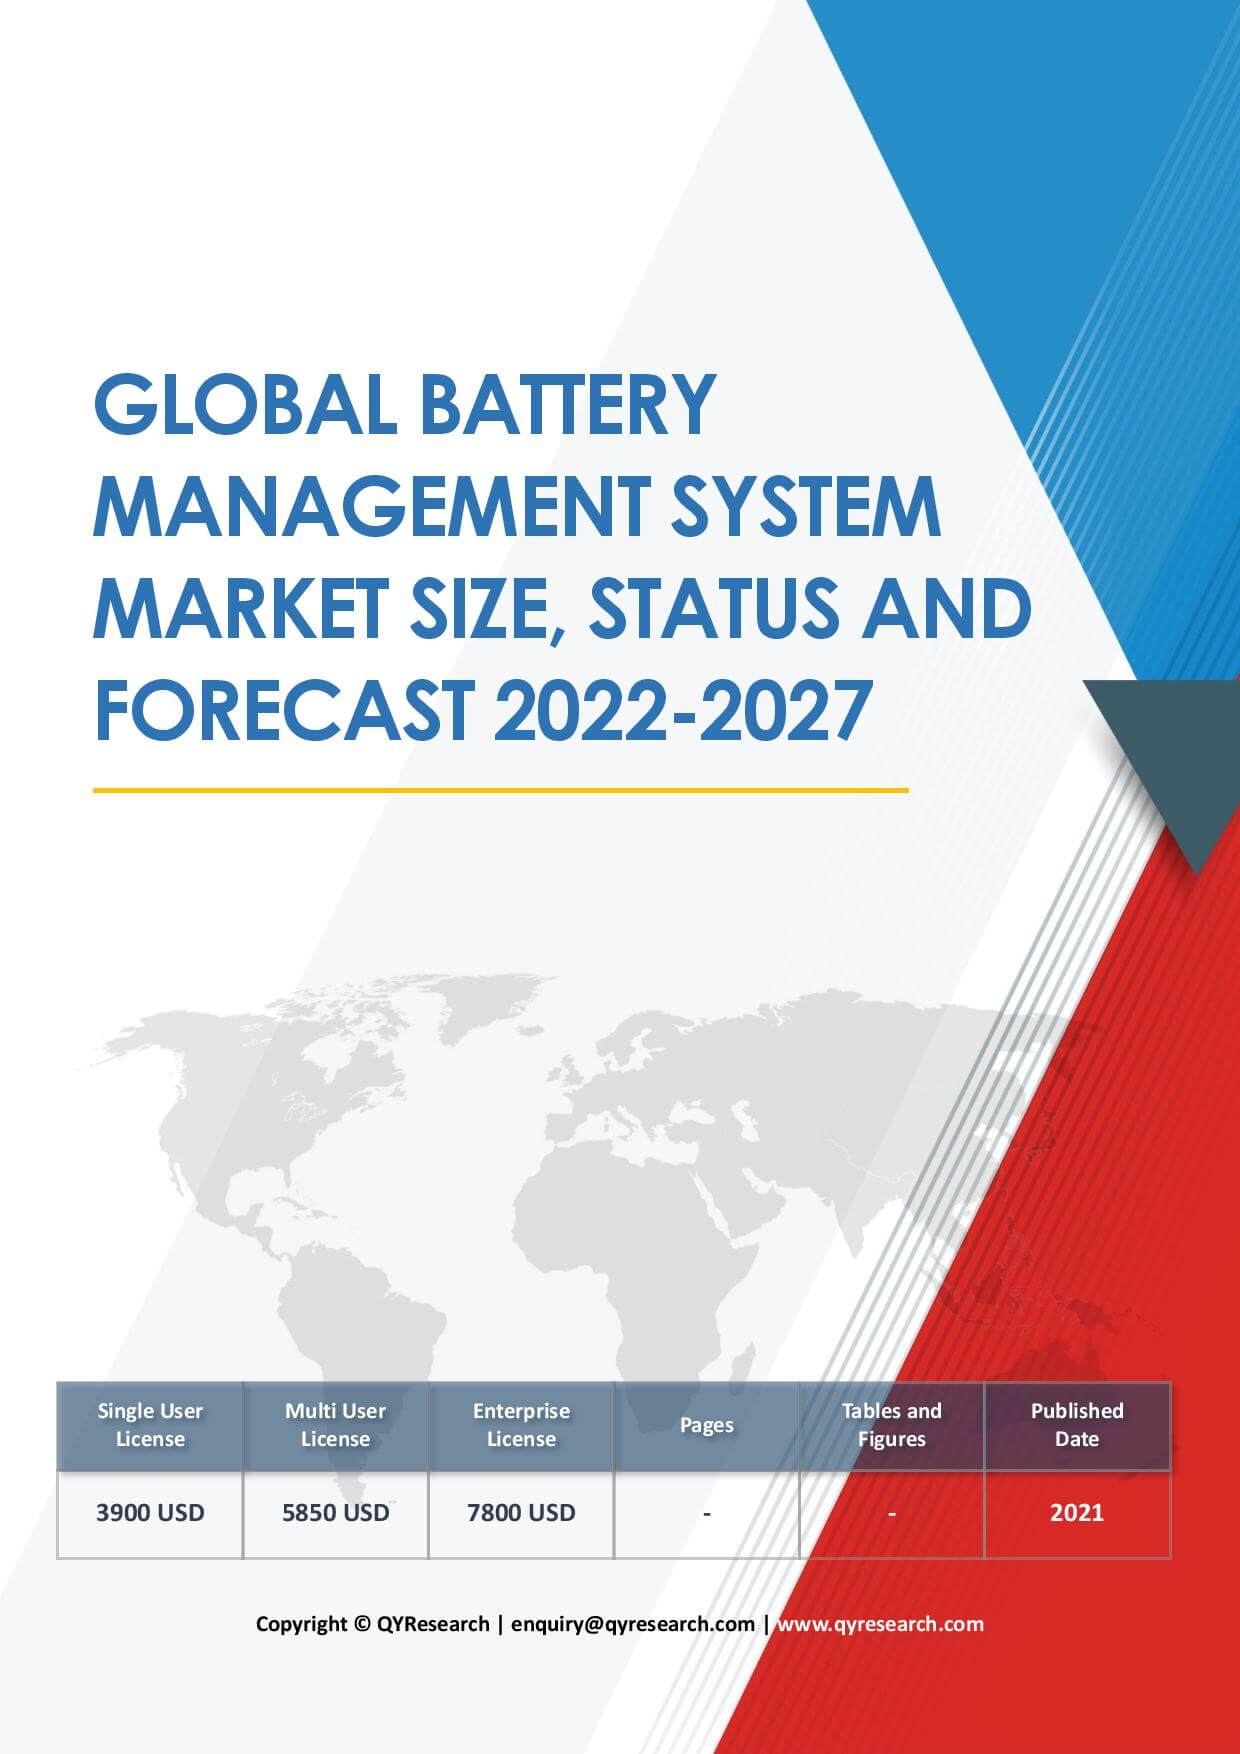 COVID 19 Impact on Battery Management System Market Global Research Reports 2020 2021